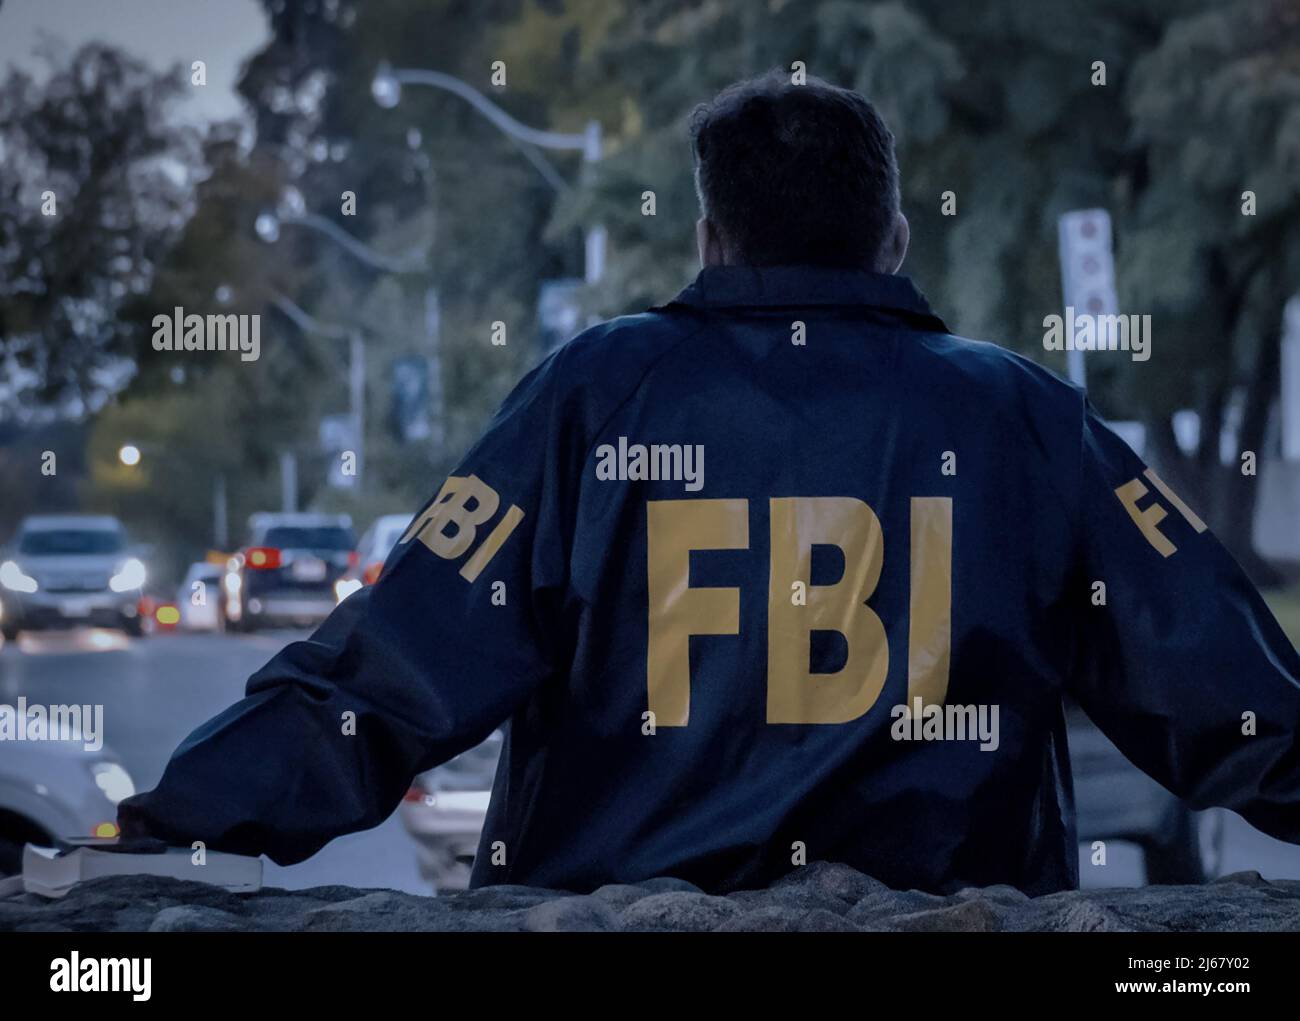 Male FBI agent wearing dark blue coat with FBI logo looking down the street with cars in the dusk seen from behind. Stock Photo